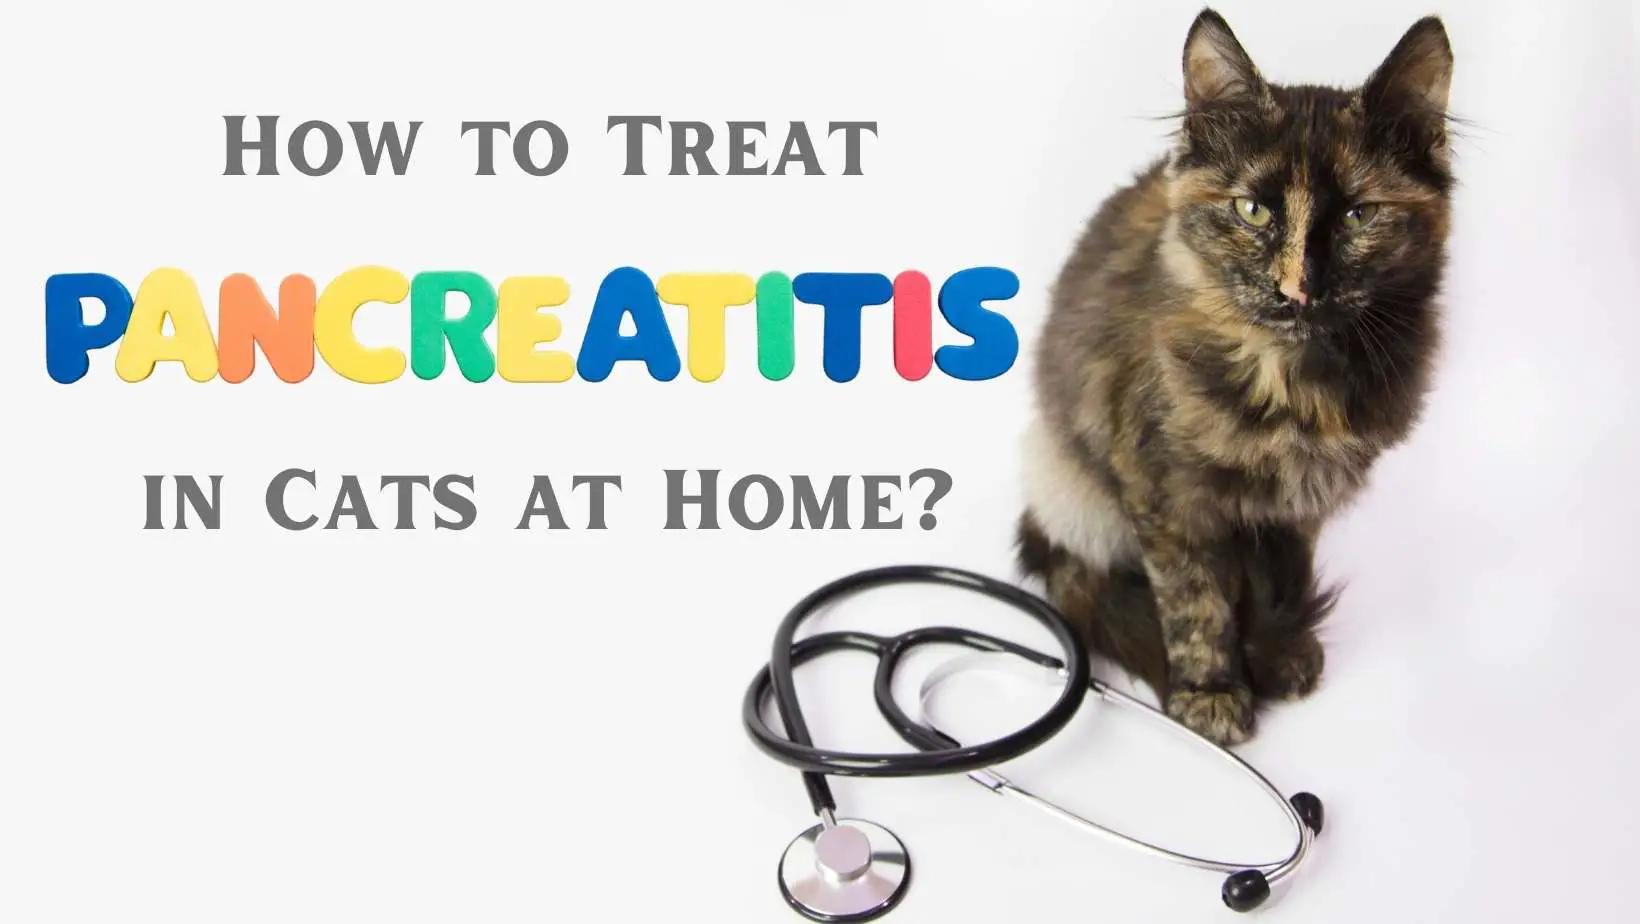 How to Treat Pancreatitis in Cats at Home?